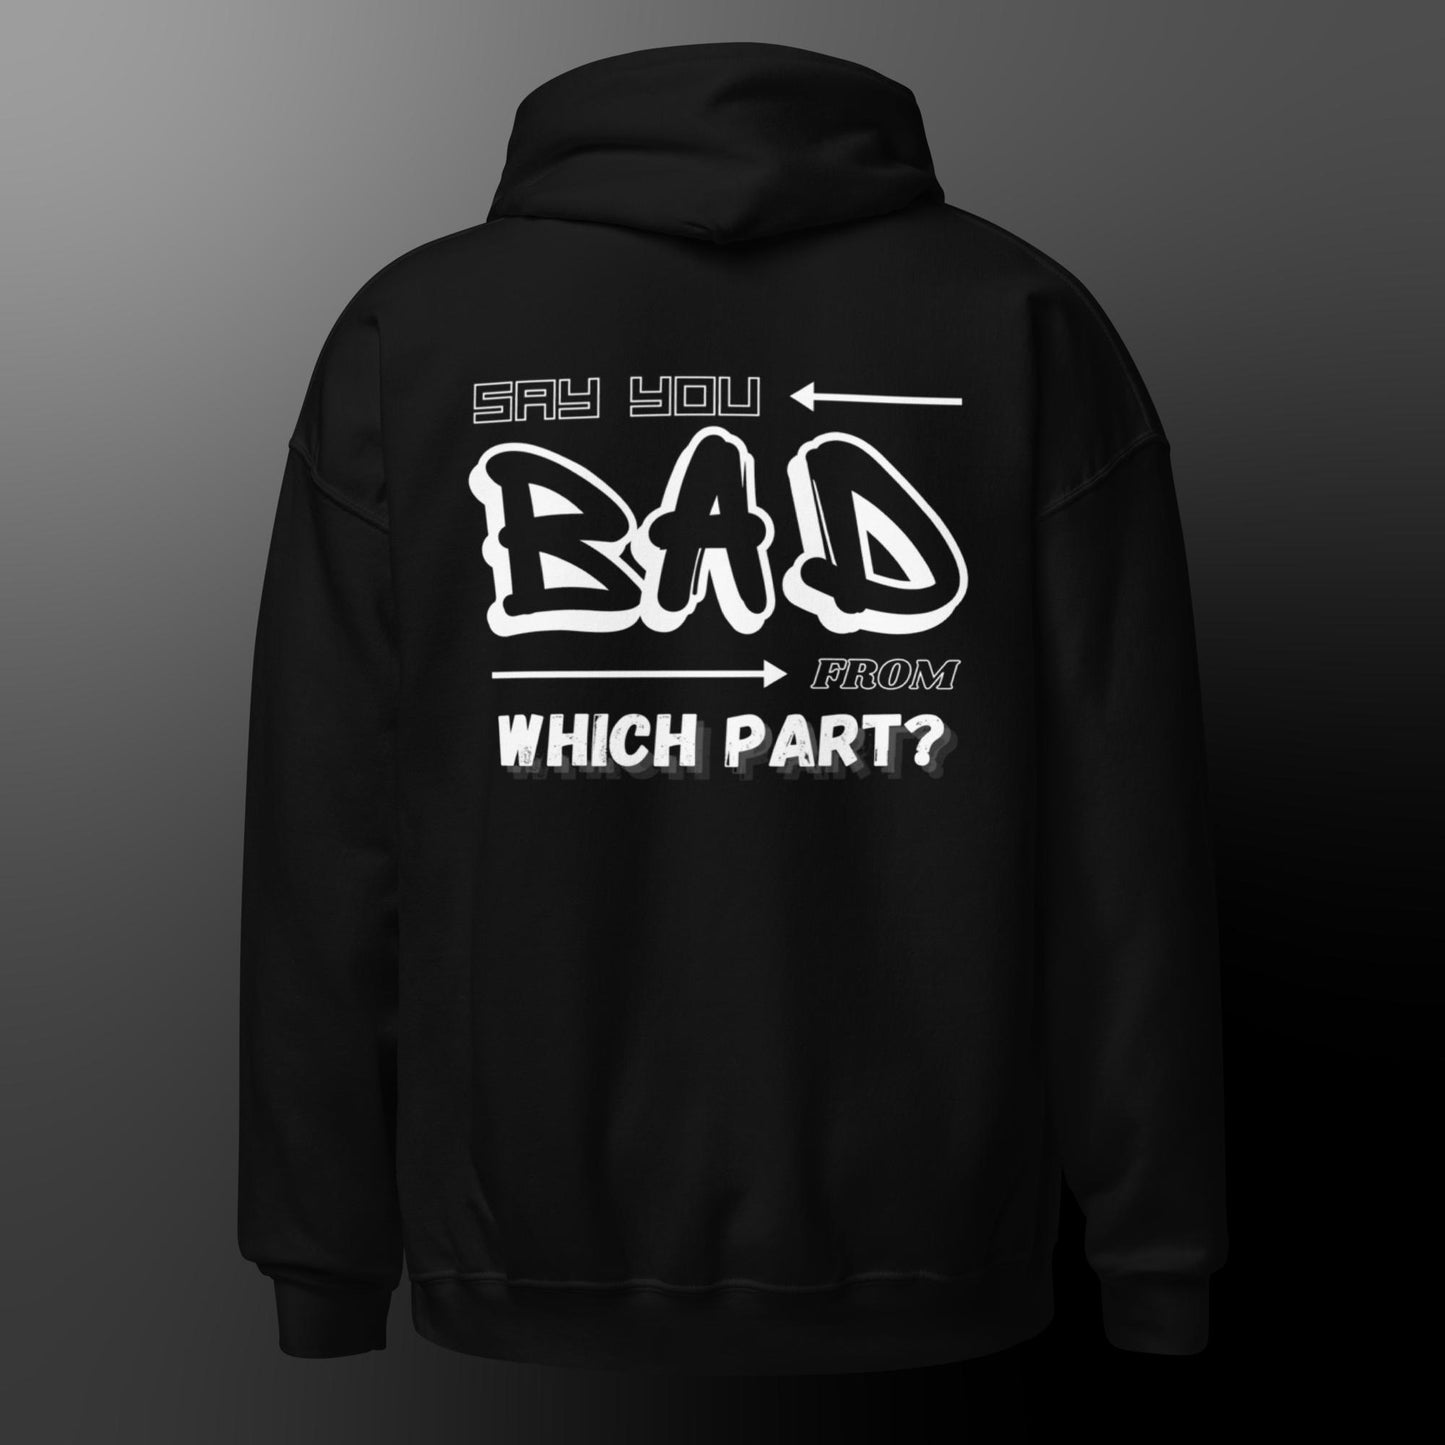 Say You Bad From Which Part - Talibans Lyrics Hoodie | UNRSVD Beauty